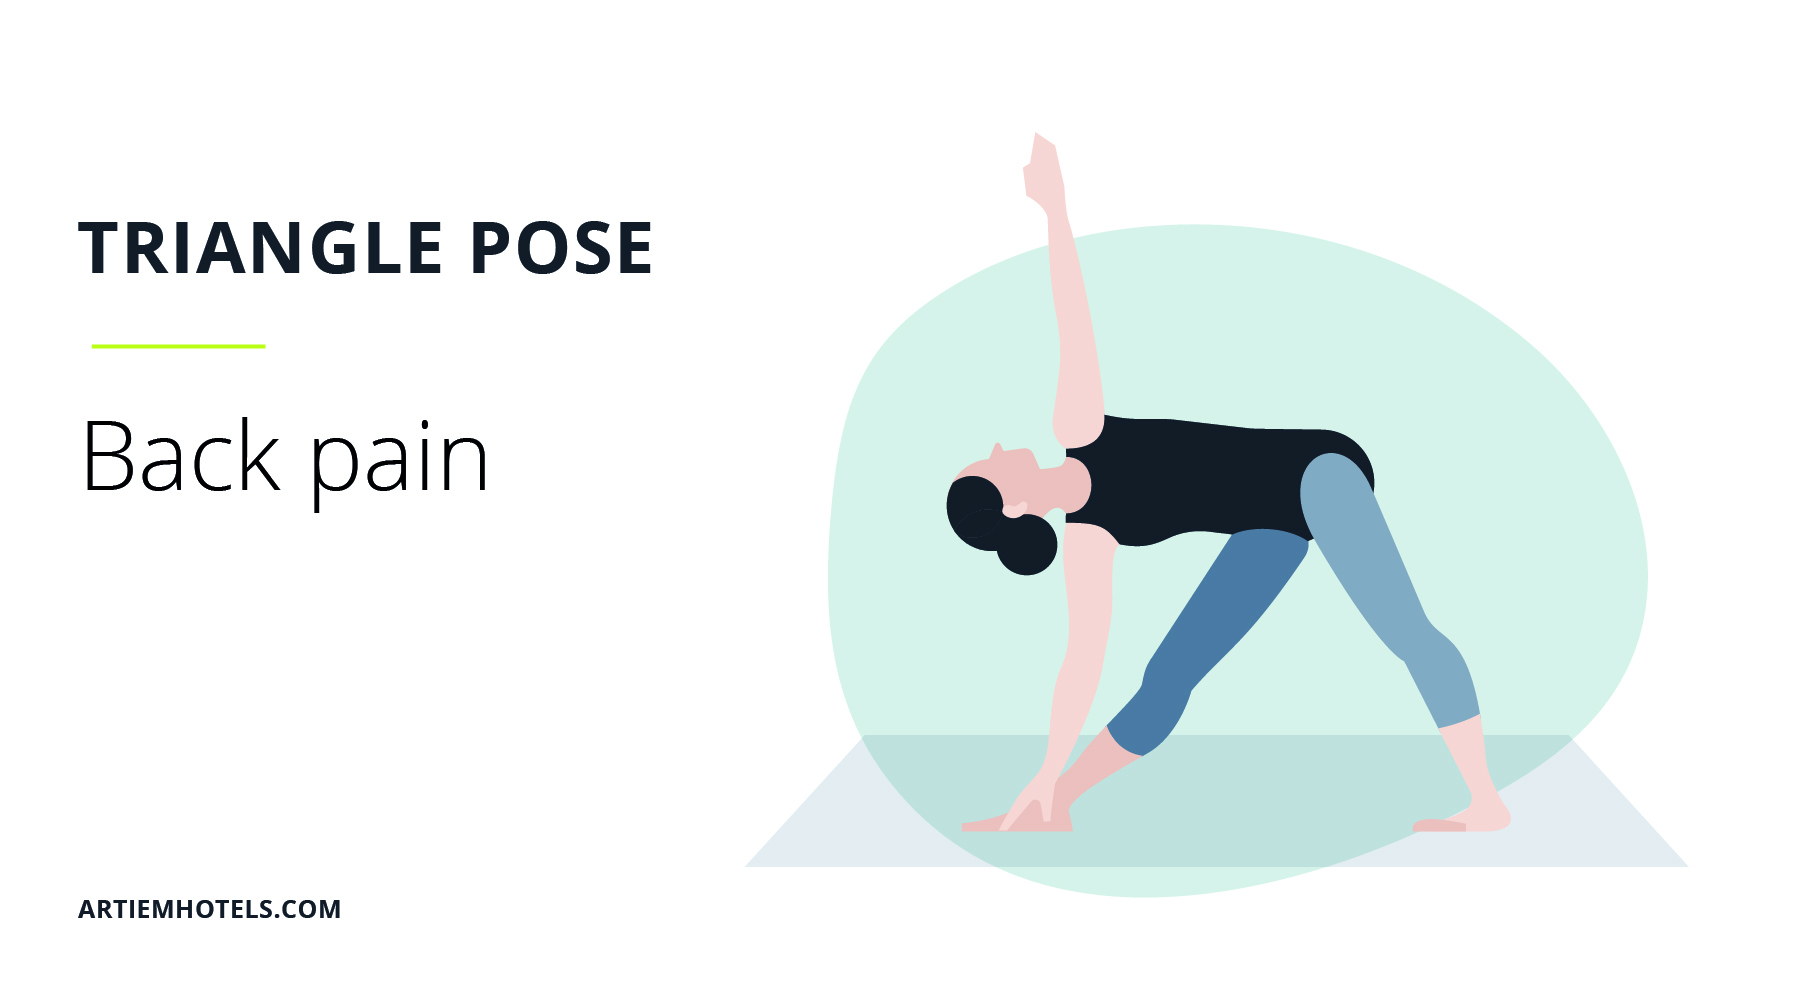 Dolphin Plank Pose (Forearm Plank) : How to Do IT, Benefits & Precautions